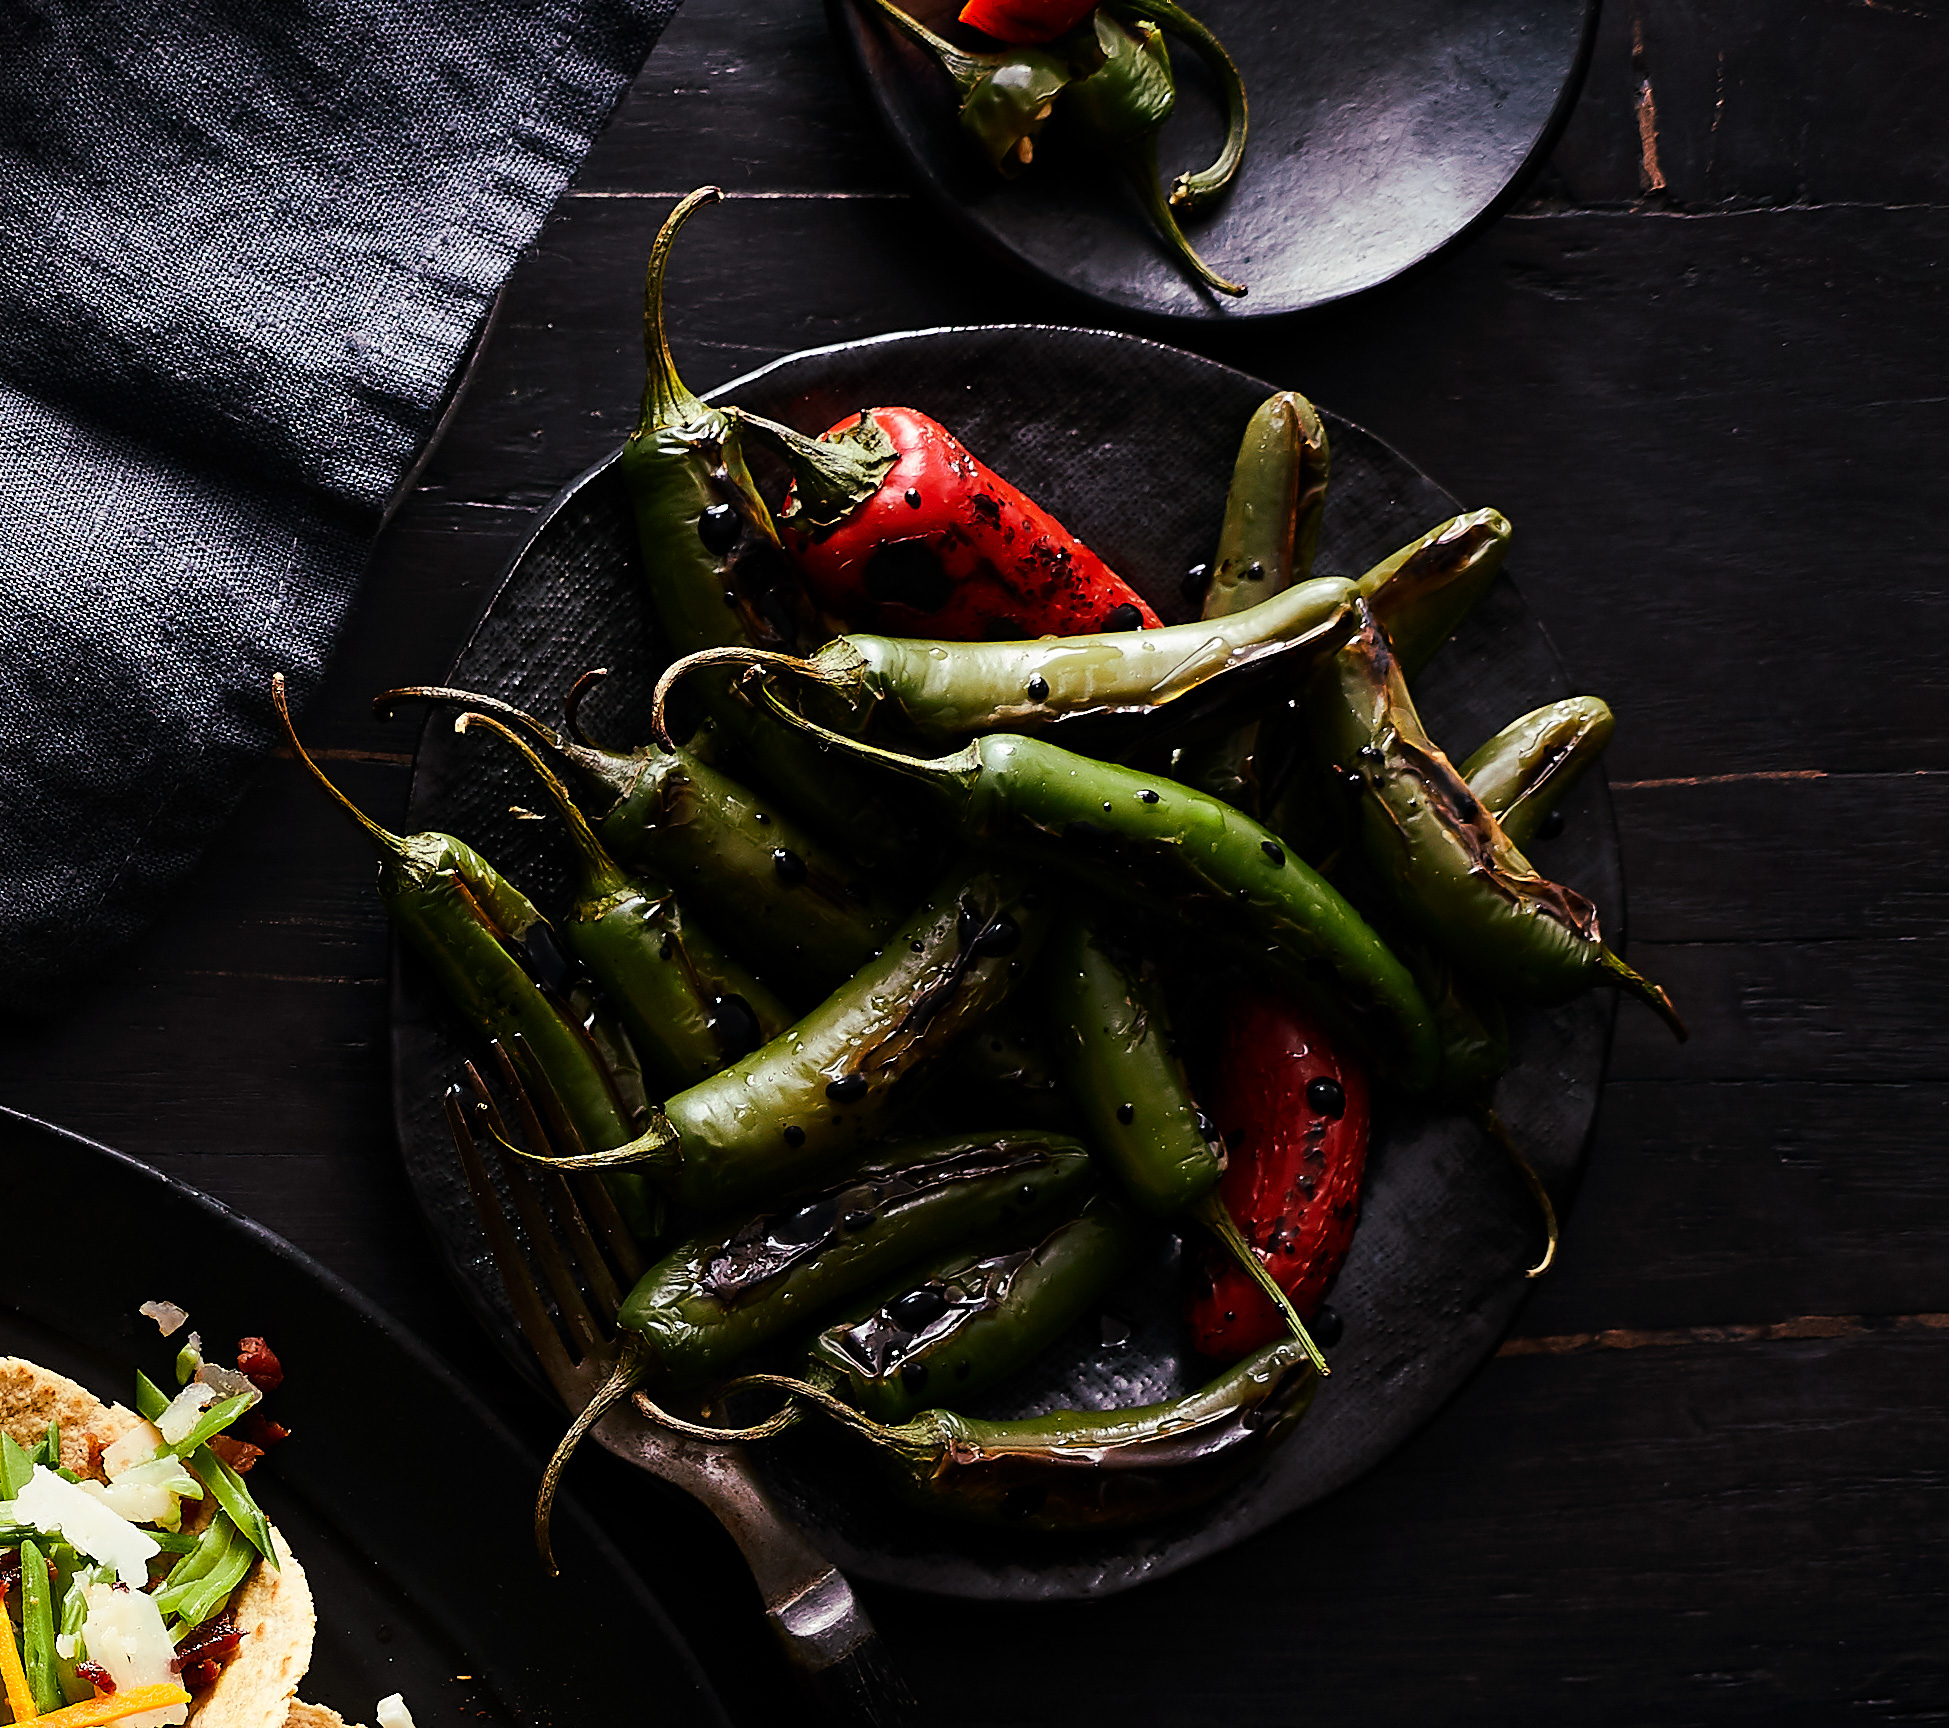 Chiles Toreados (Blistered Chiles)